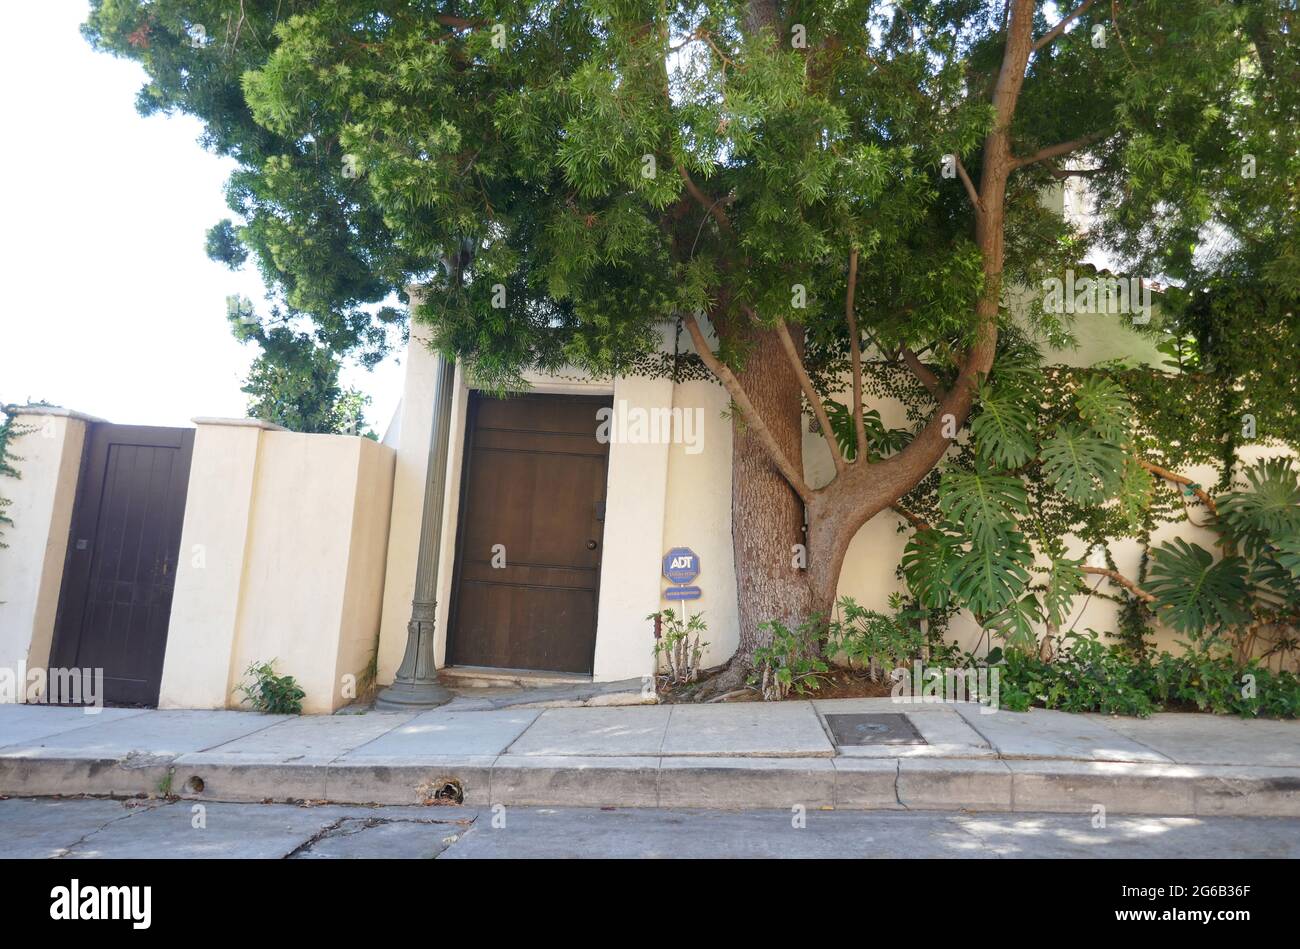 Los Angeles, California, USA 4th July 2021 A general view of atmosphere of actress/director Ida Lupino's Former home/house in Hollywood Hills on July 4, 2021 in Los Angeles, California, USA. Photo by Barry King/Alamy Stock Photo Stock Photo